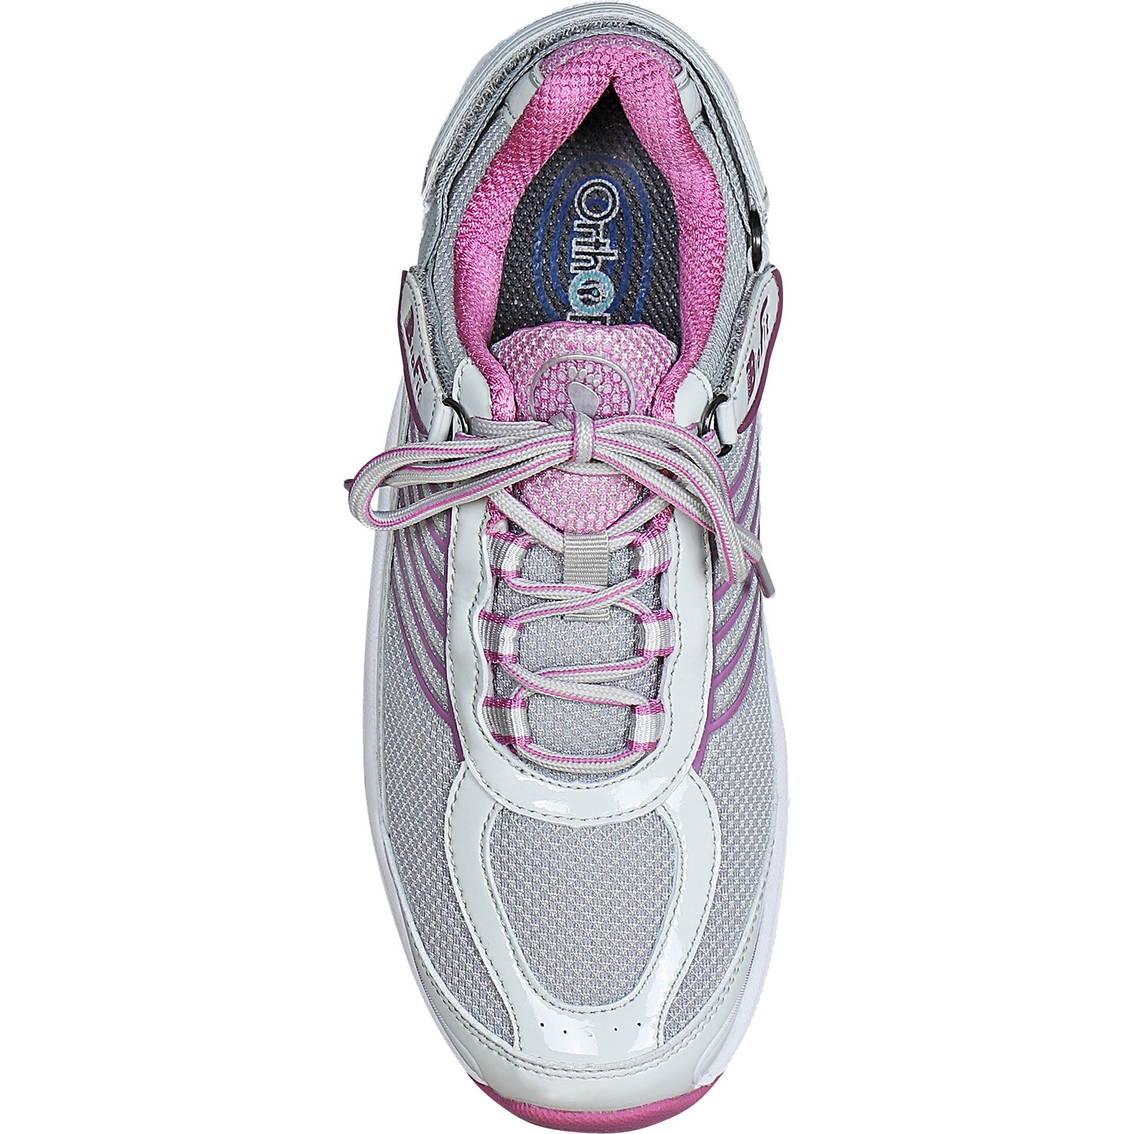 OrthoFeet Women's Verve Tie-Less Sneakers - Image 3 of 5